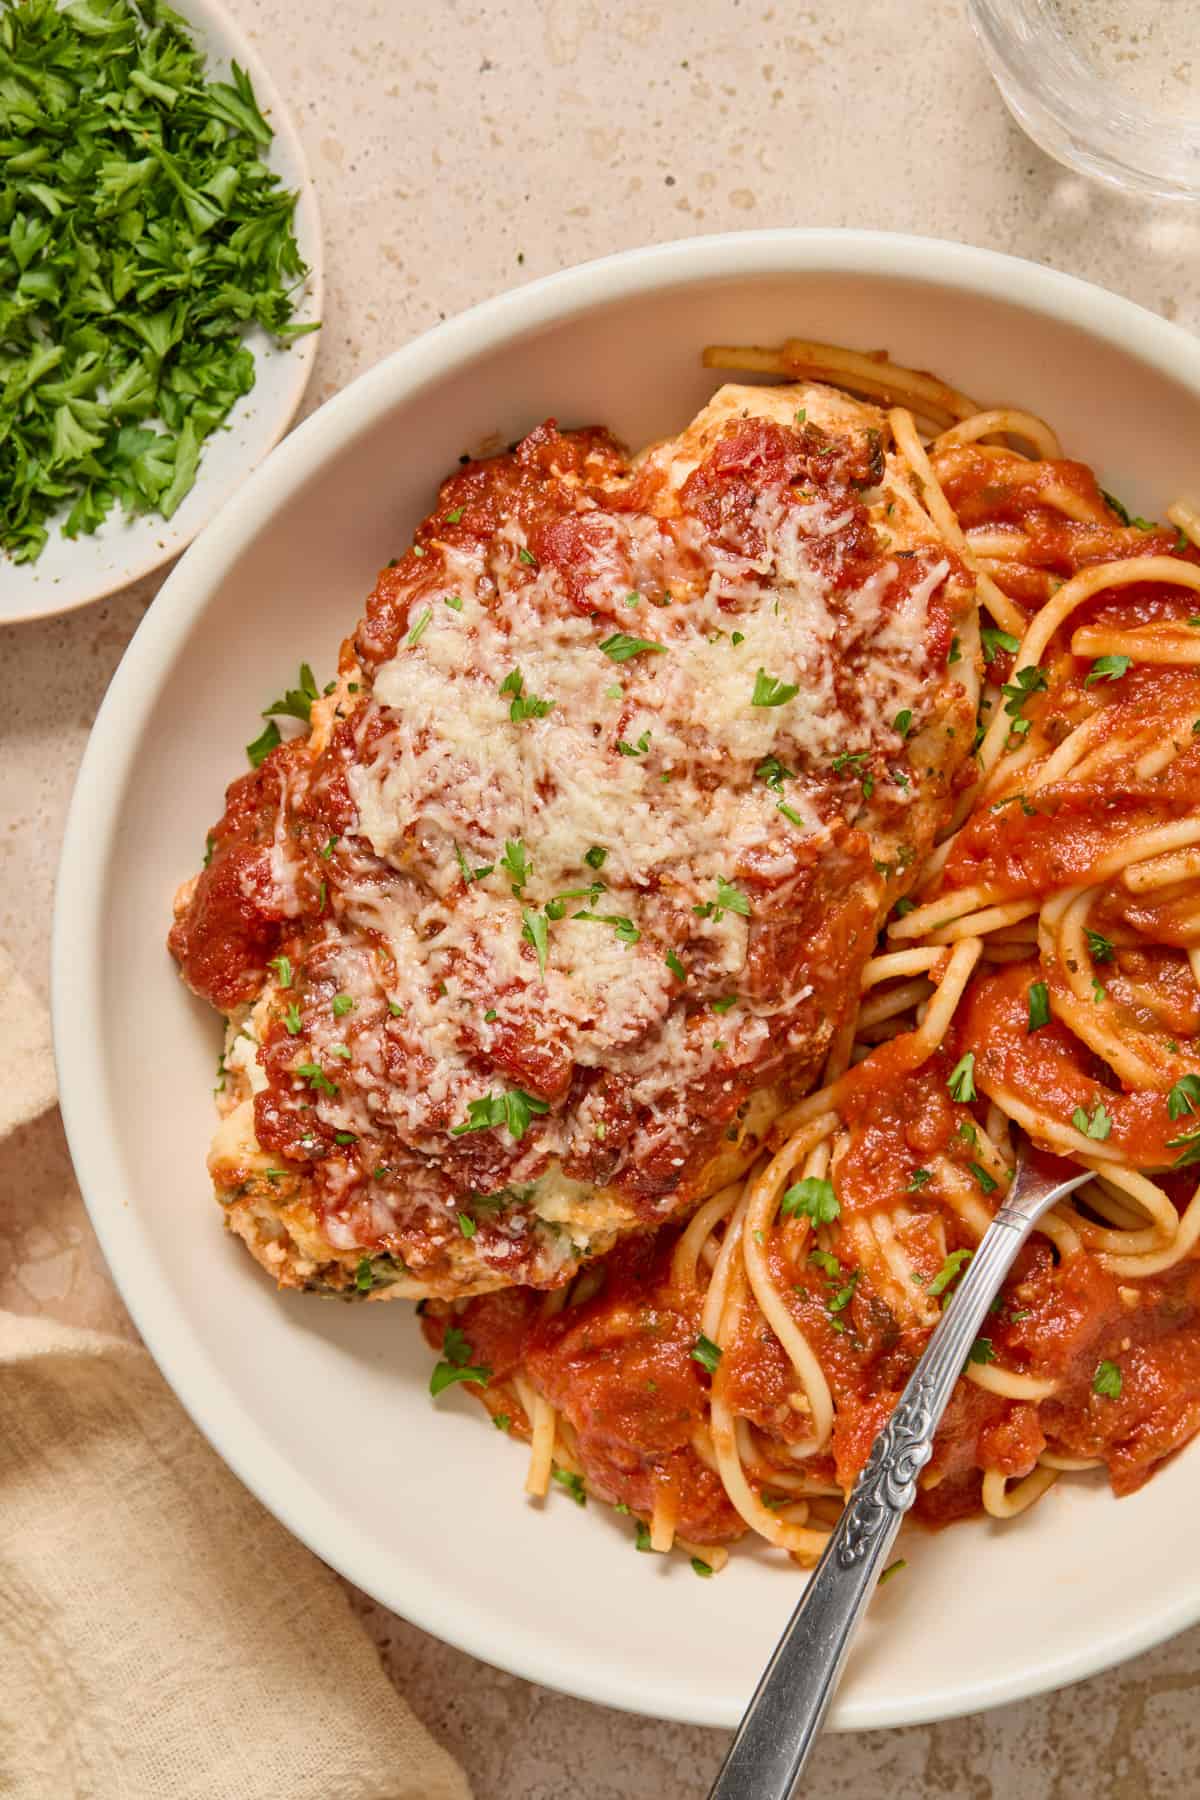 Baked chicken in bowl of spaghetti with fork.